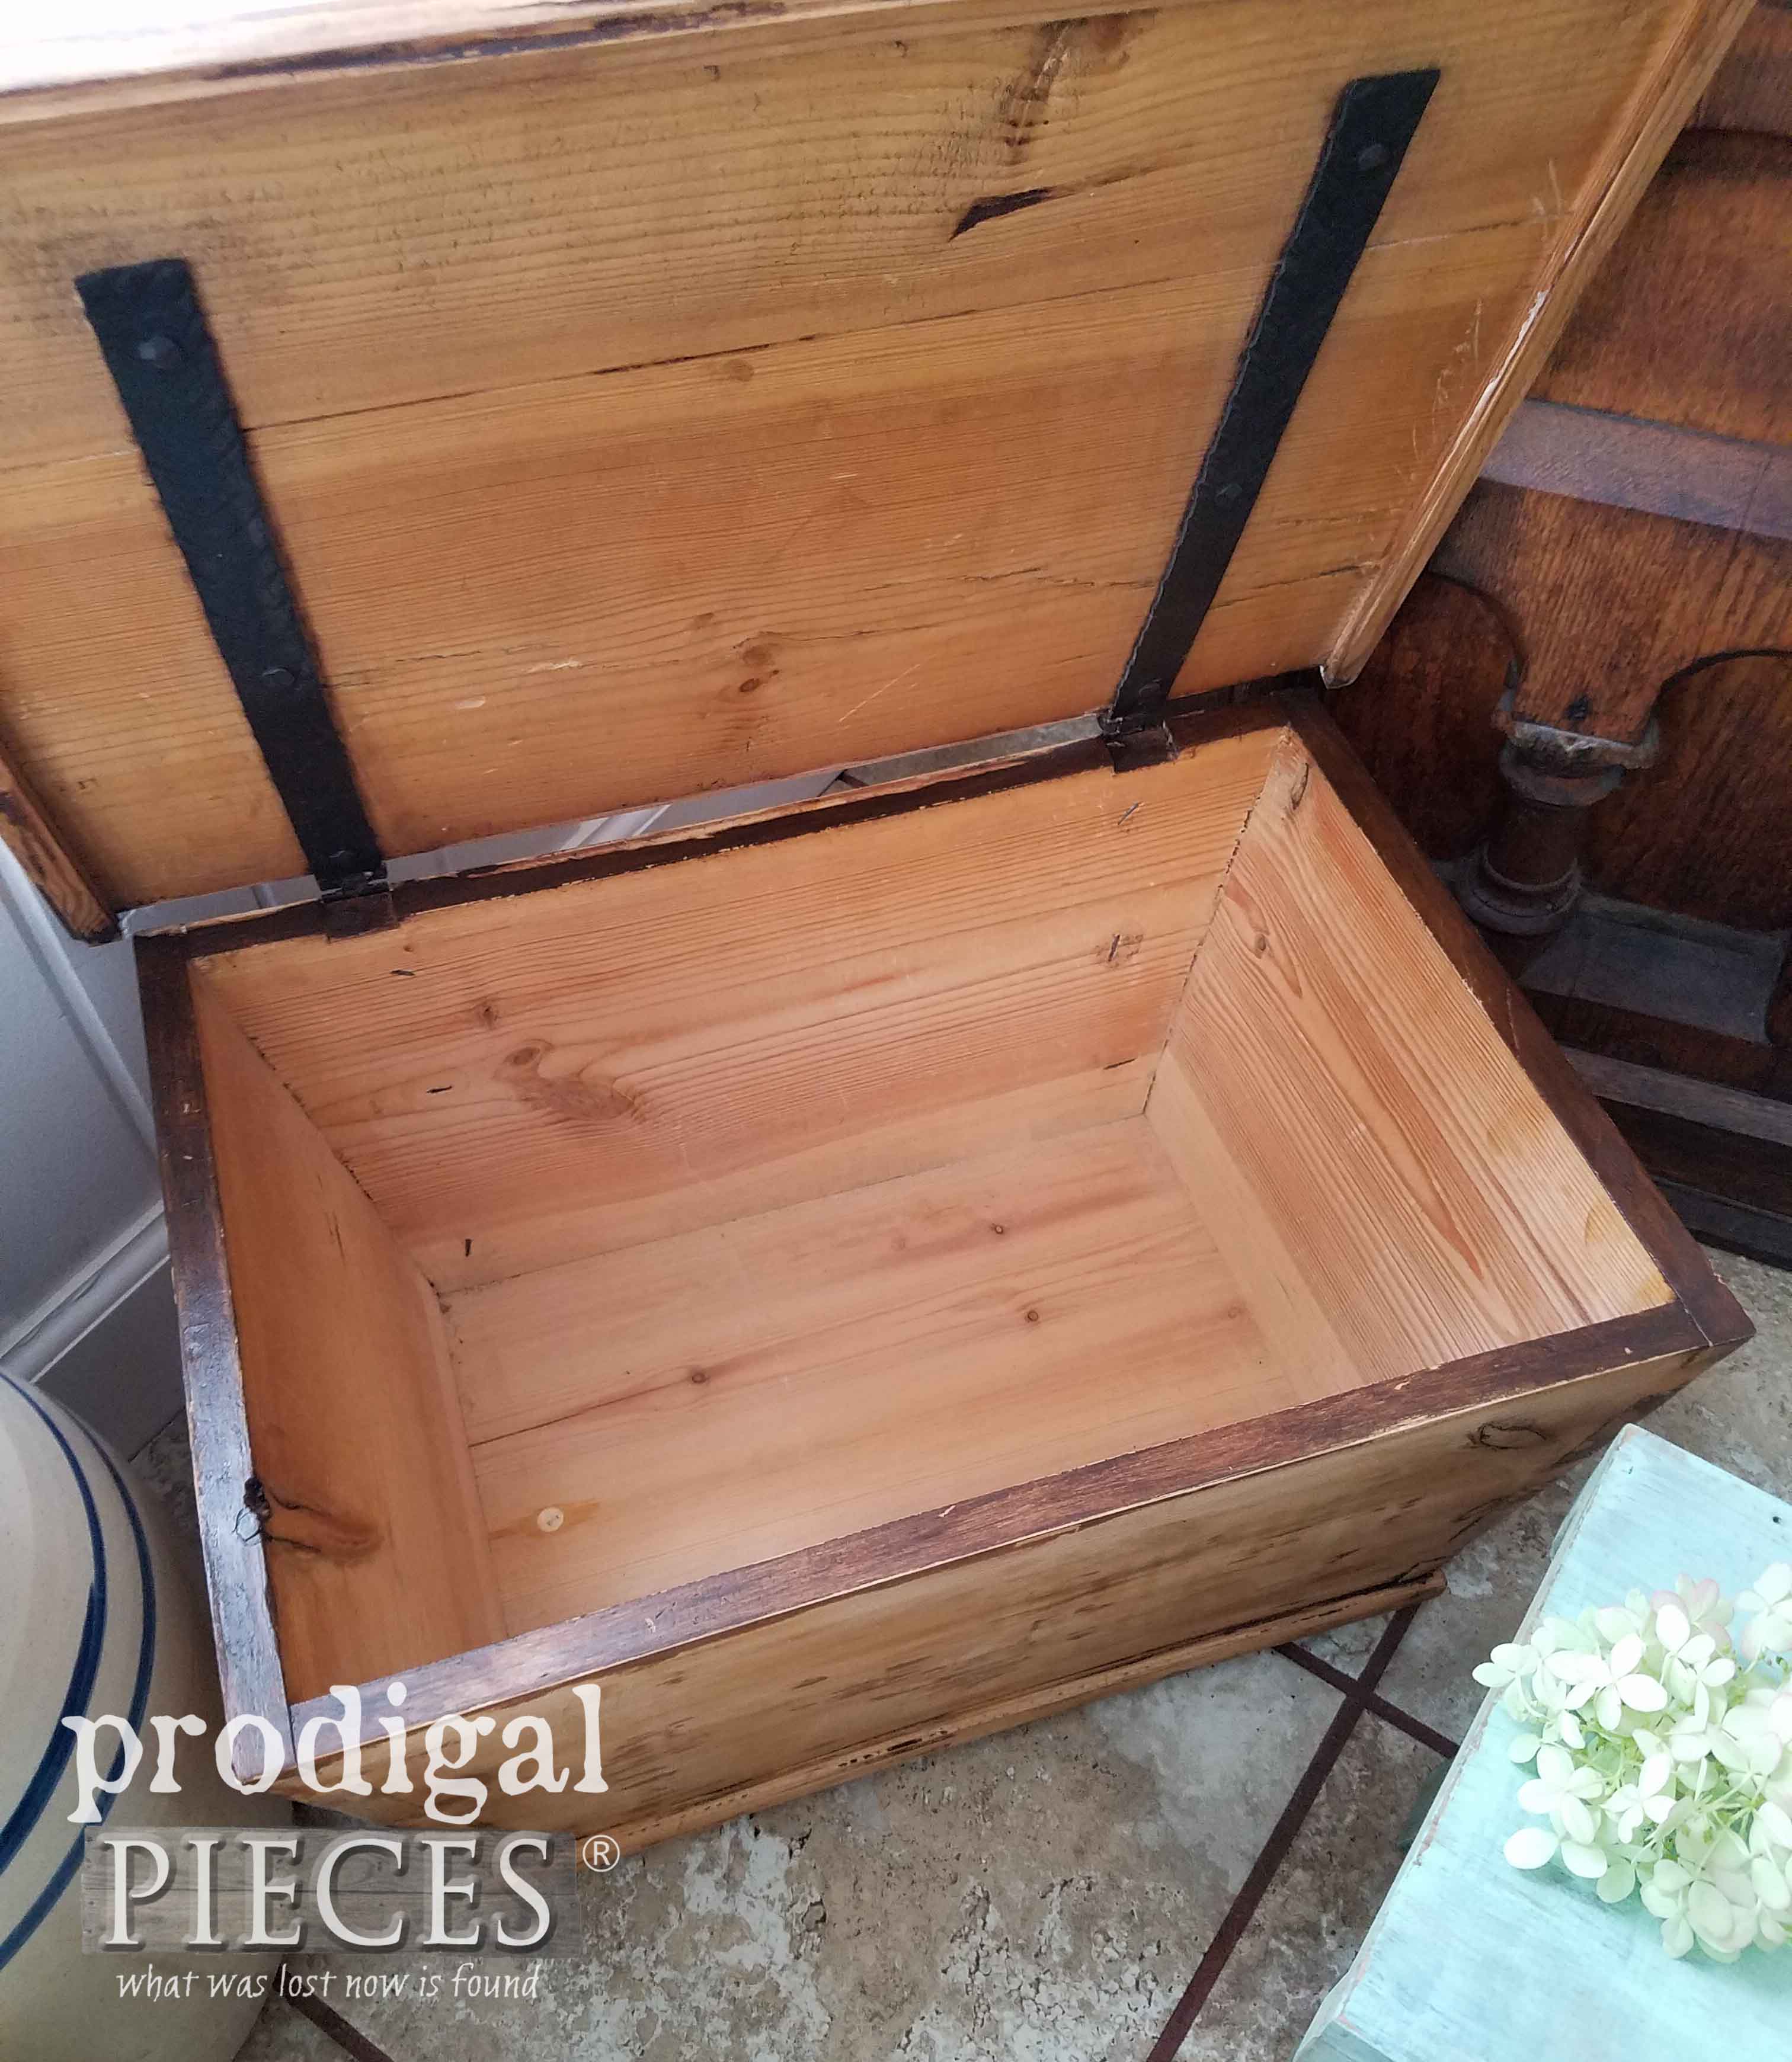 Inside Handmade Wooden Chest with Farmhouse Style for Thrifted Makeovers by Prodigal Pieces | prodigalpieces.com